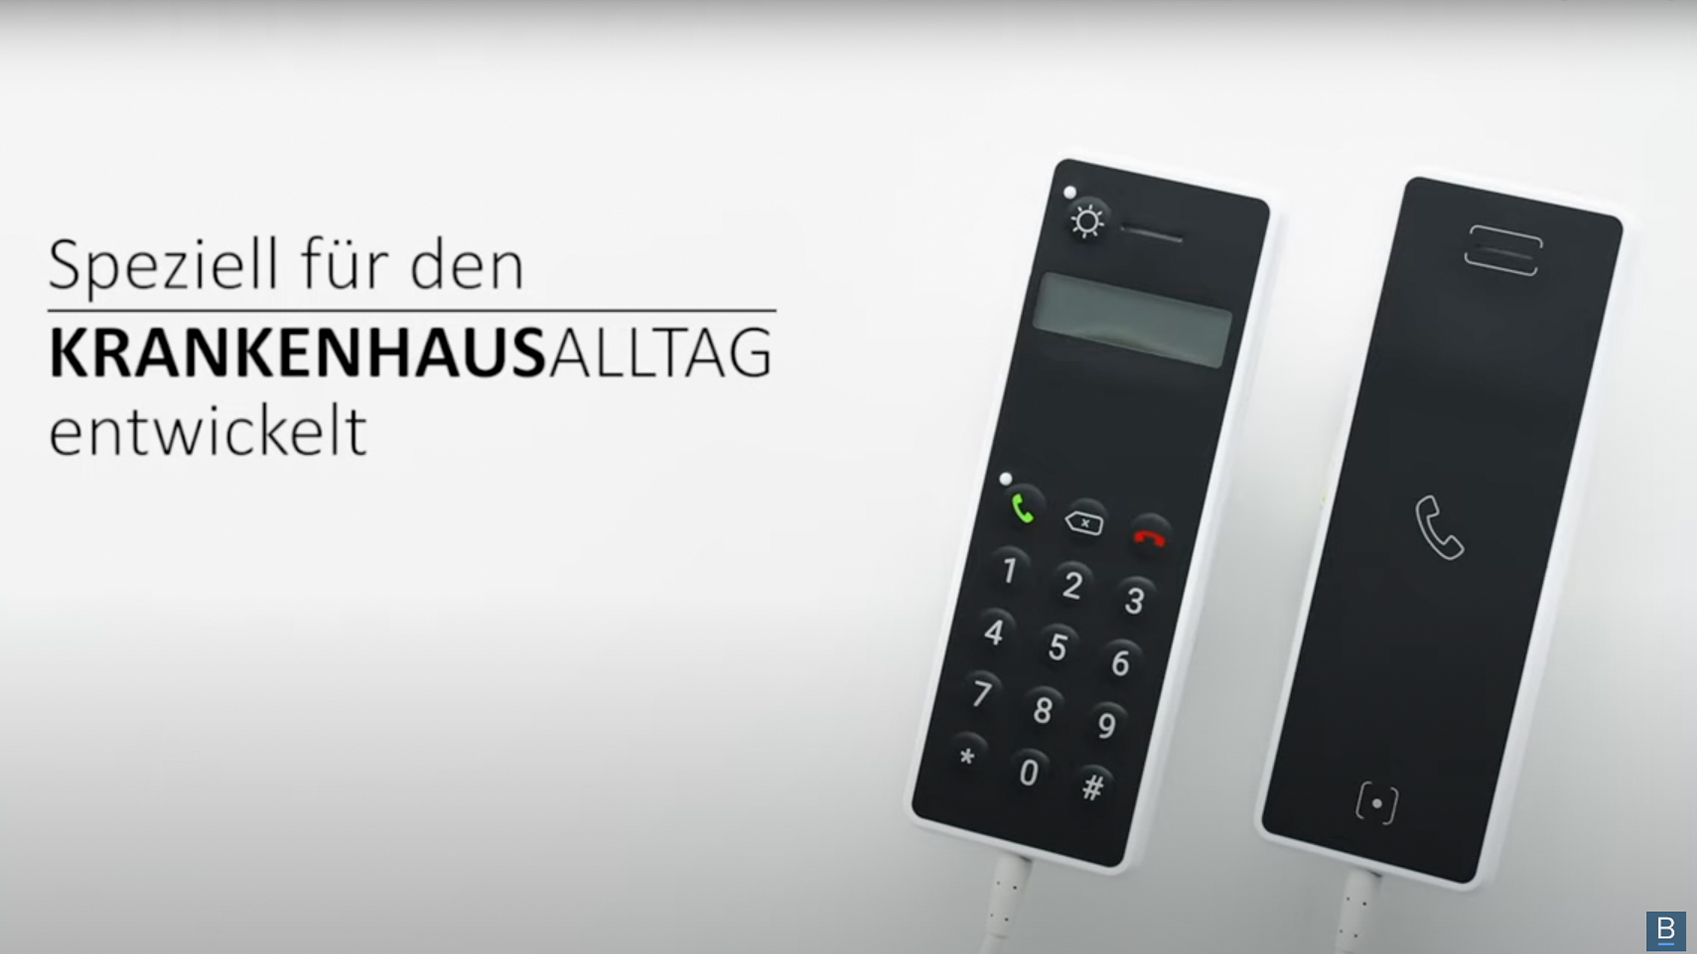 ConnectedCare.Phones 6SF und 7SF – Frontalansicht